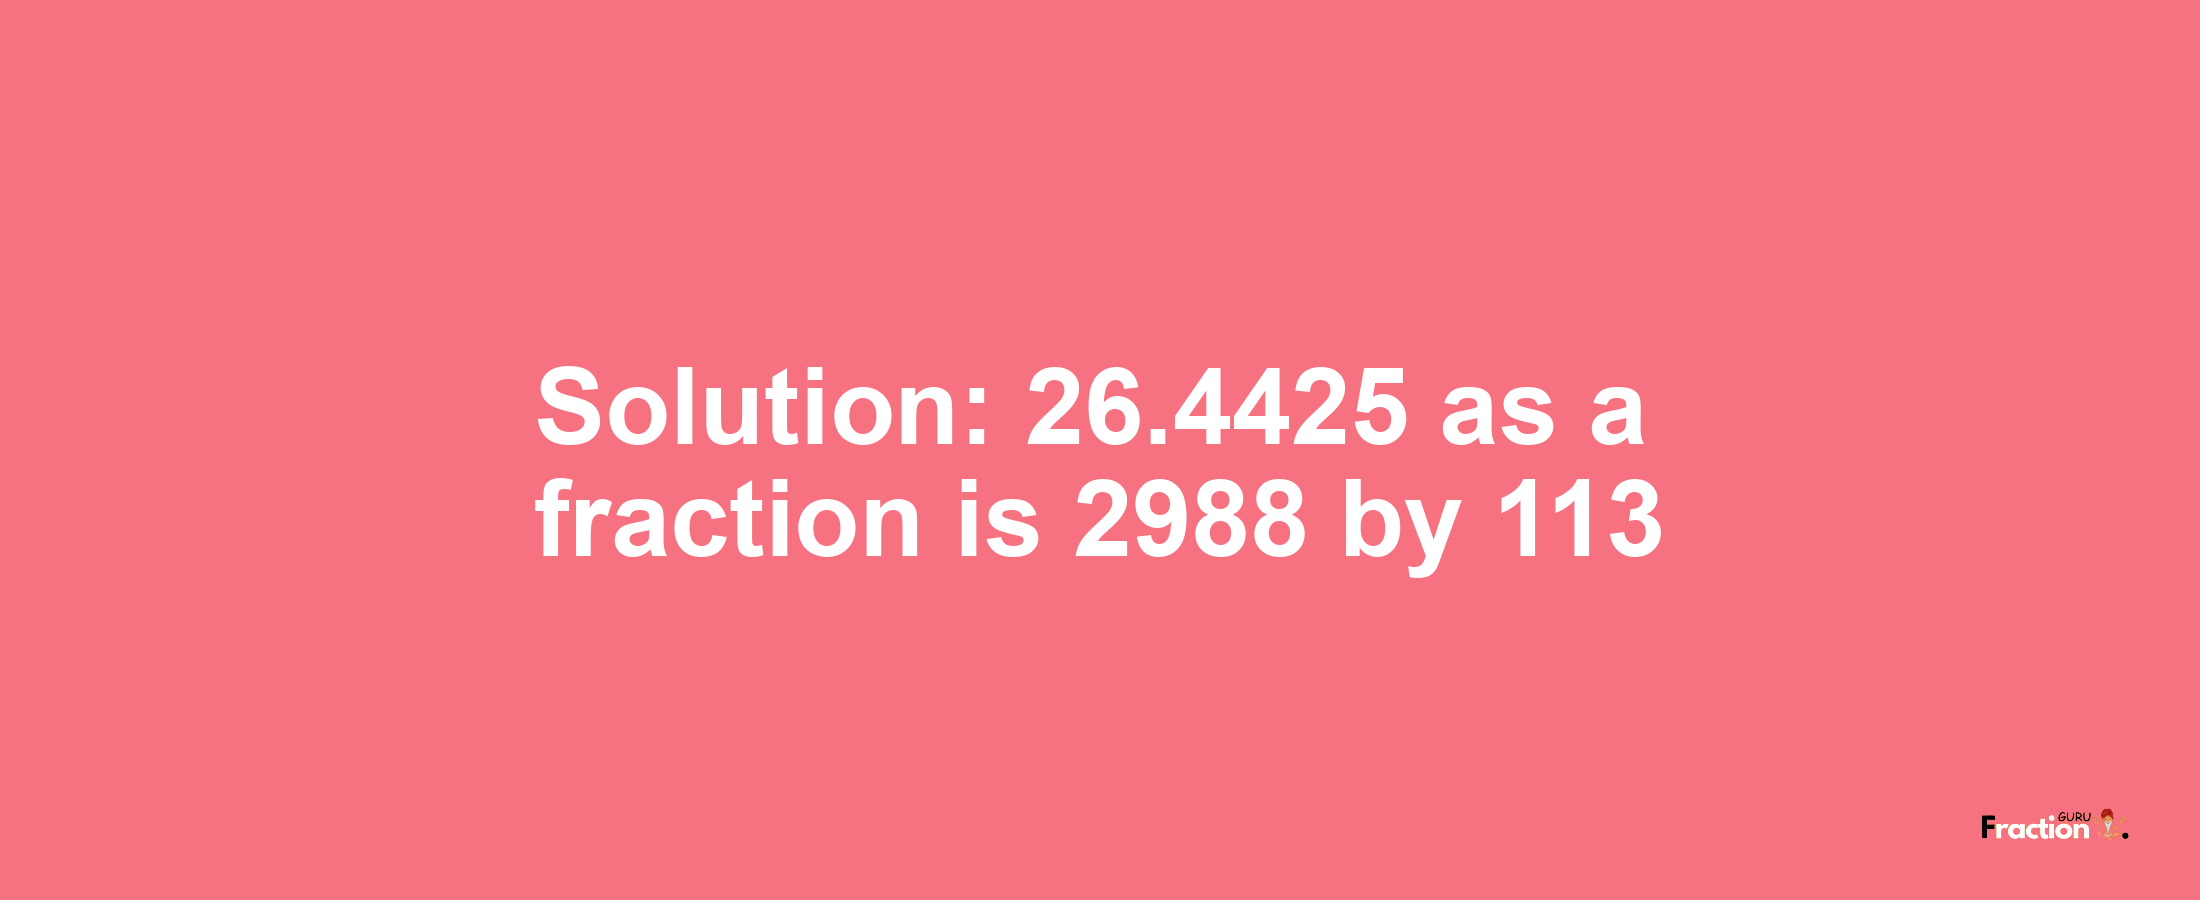 Solution:26.4425 as a fraction is 2988/113